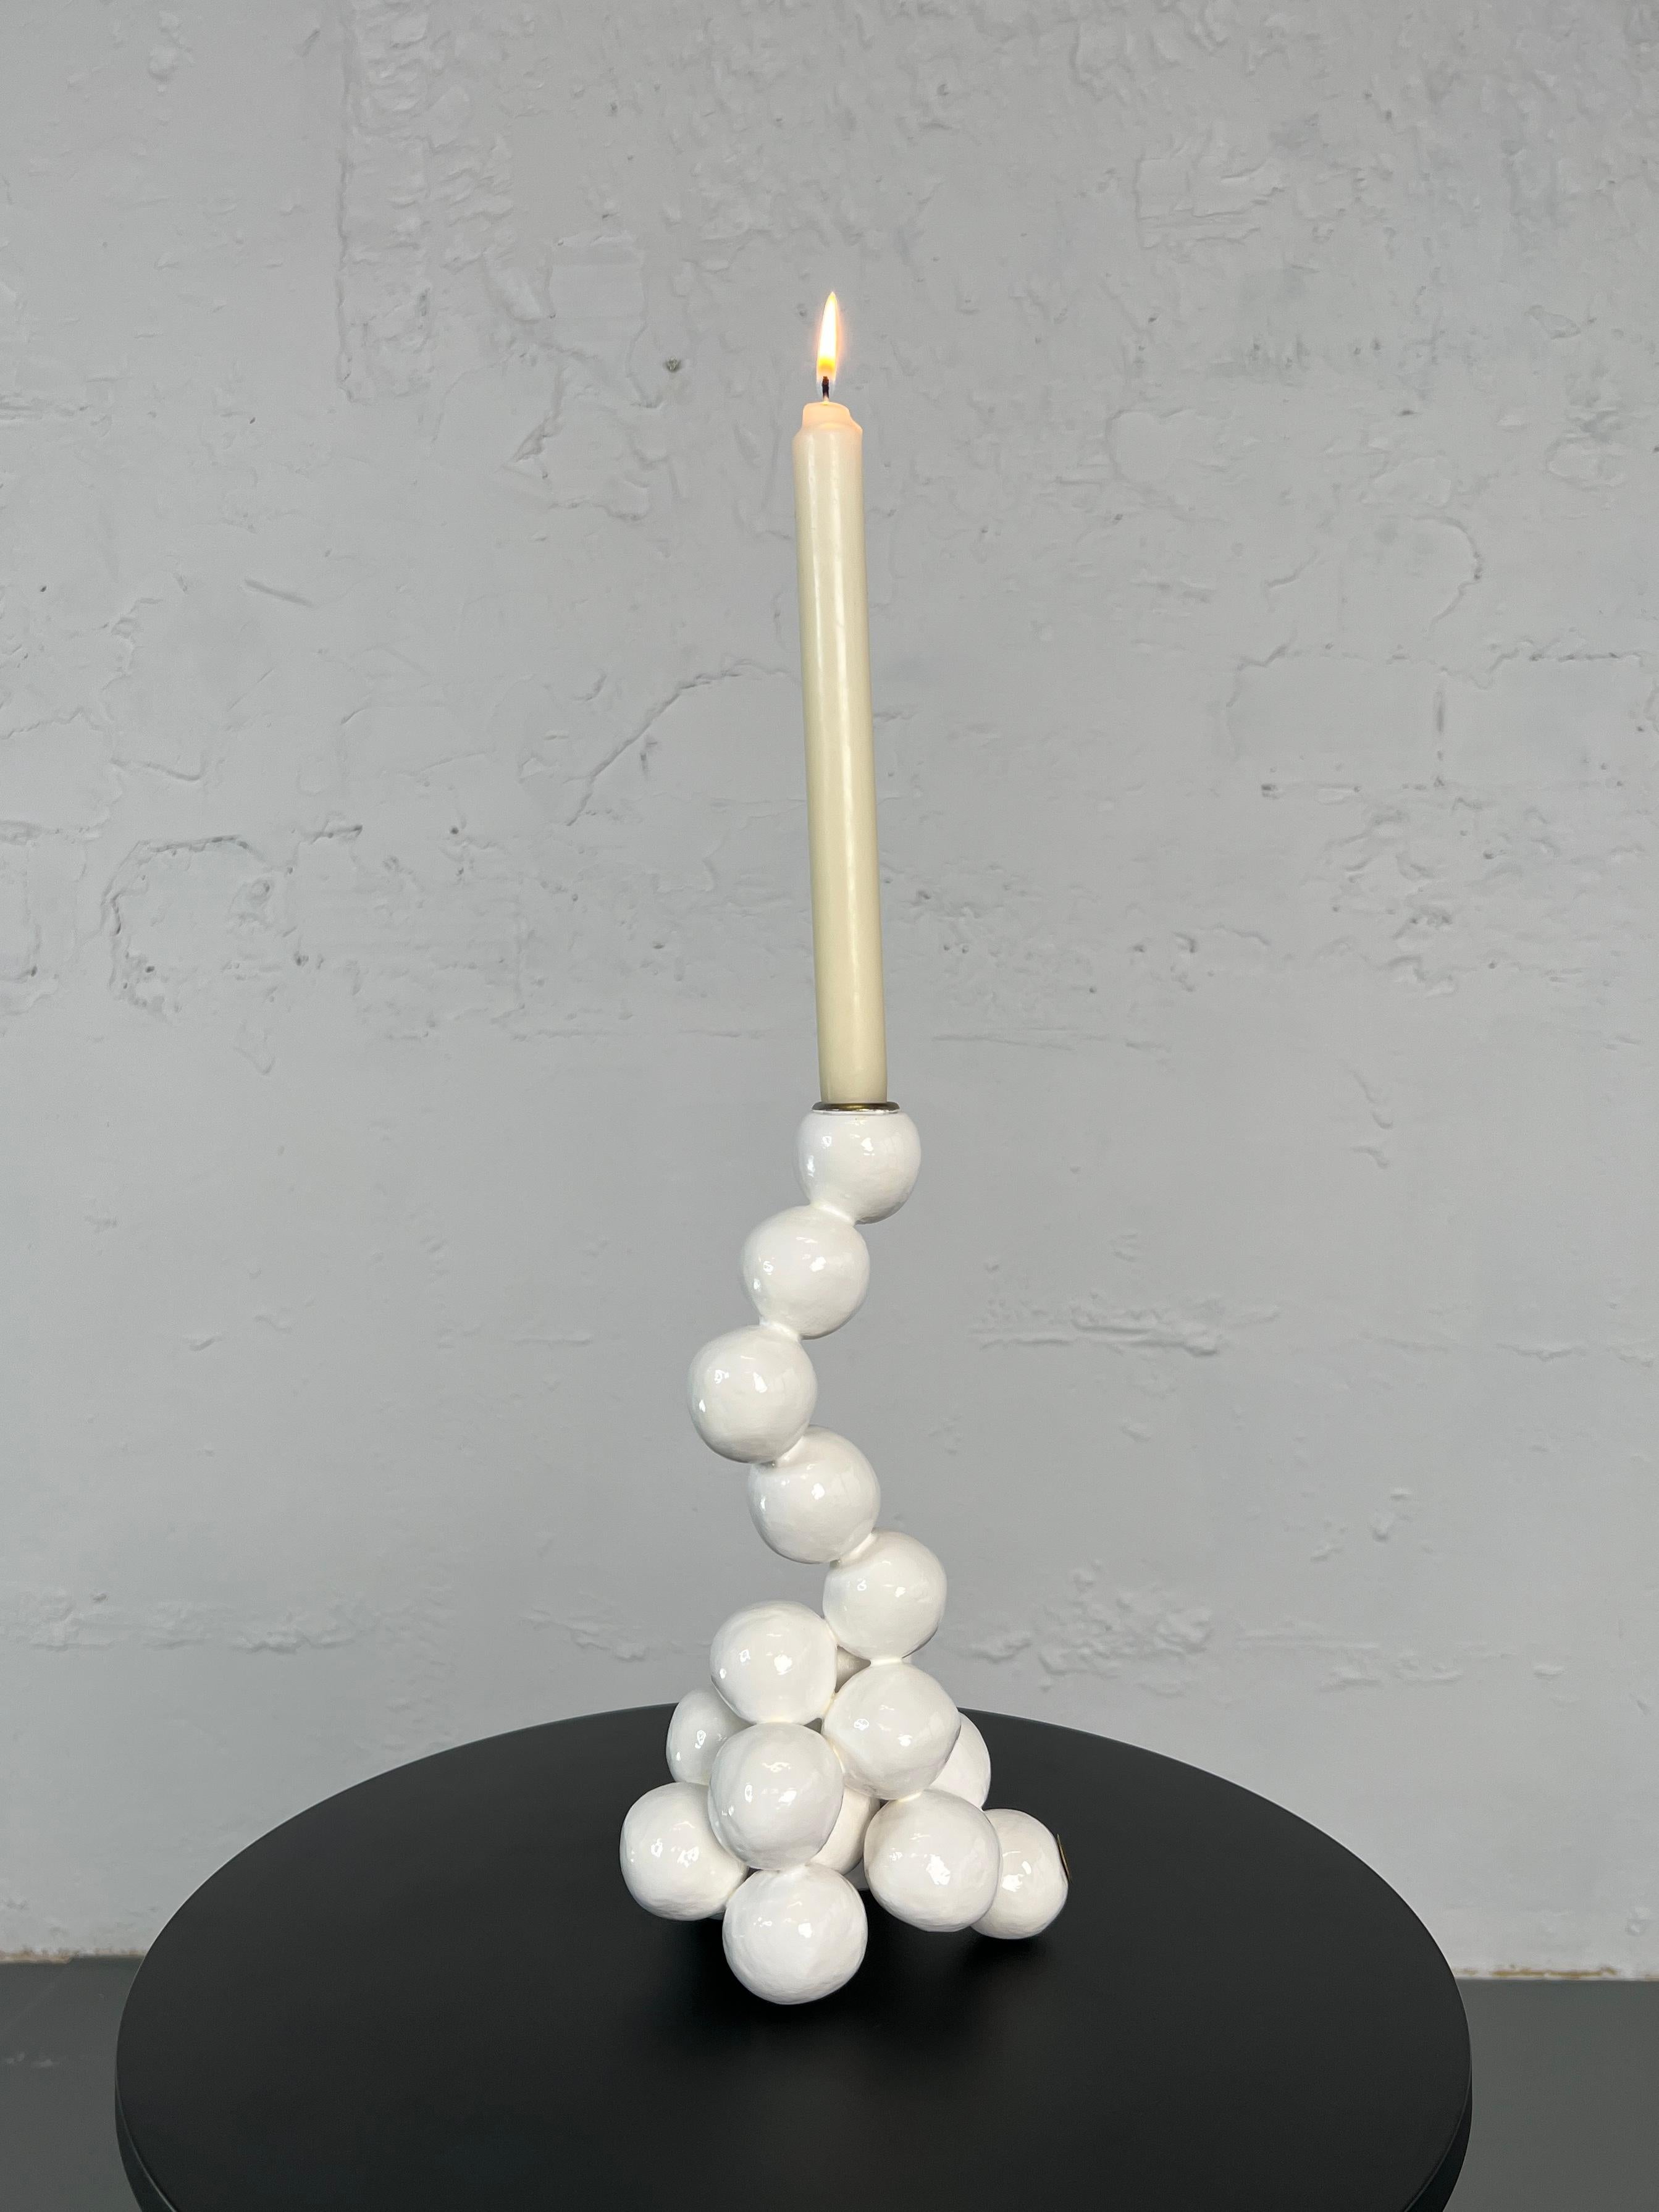 Arty White Candleholder "Pearls" for 1 Candle Sphere Original Sculpture